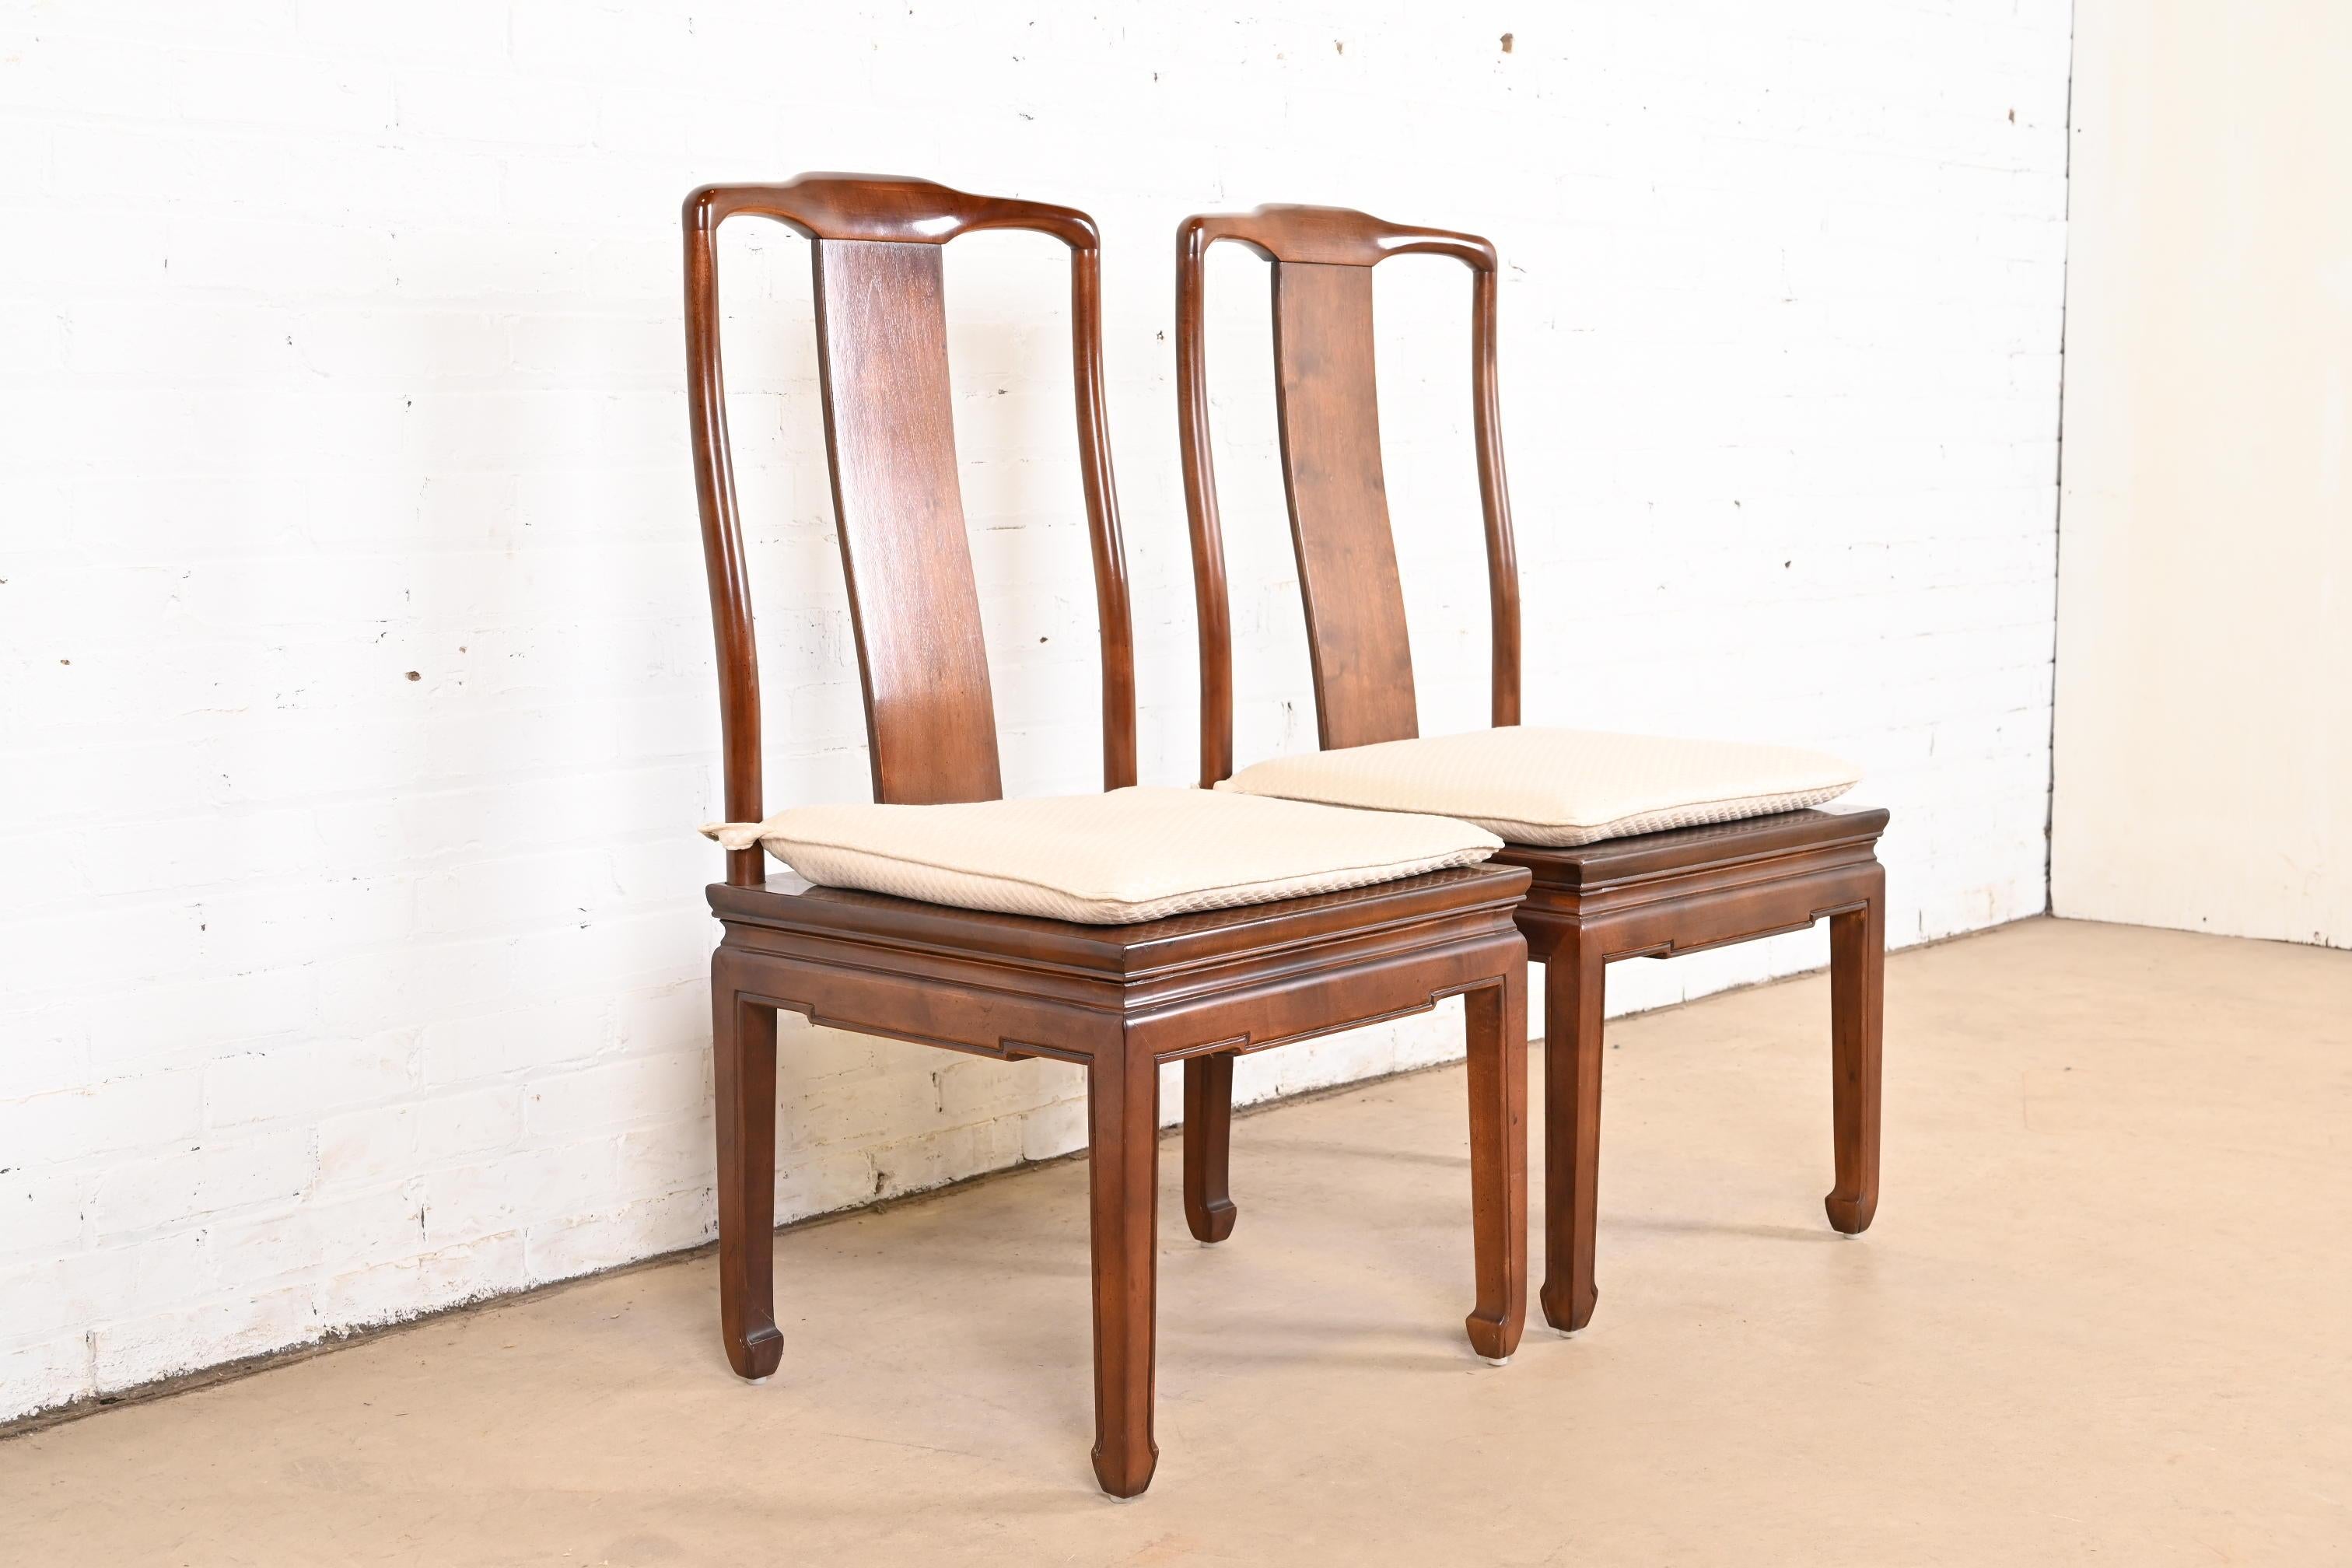 Upholstery Henredon Hollywood Regency Chinoiserie Sculpted Mahogany Dining Chairs, Pair For Sale